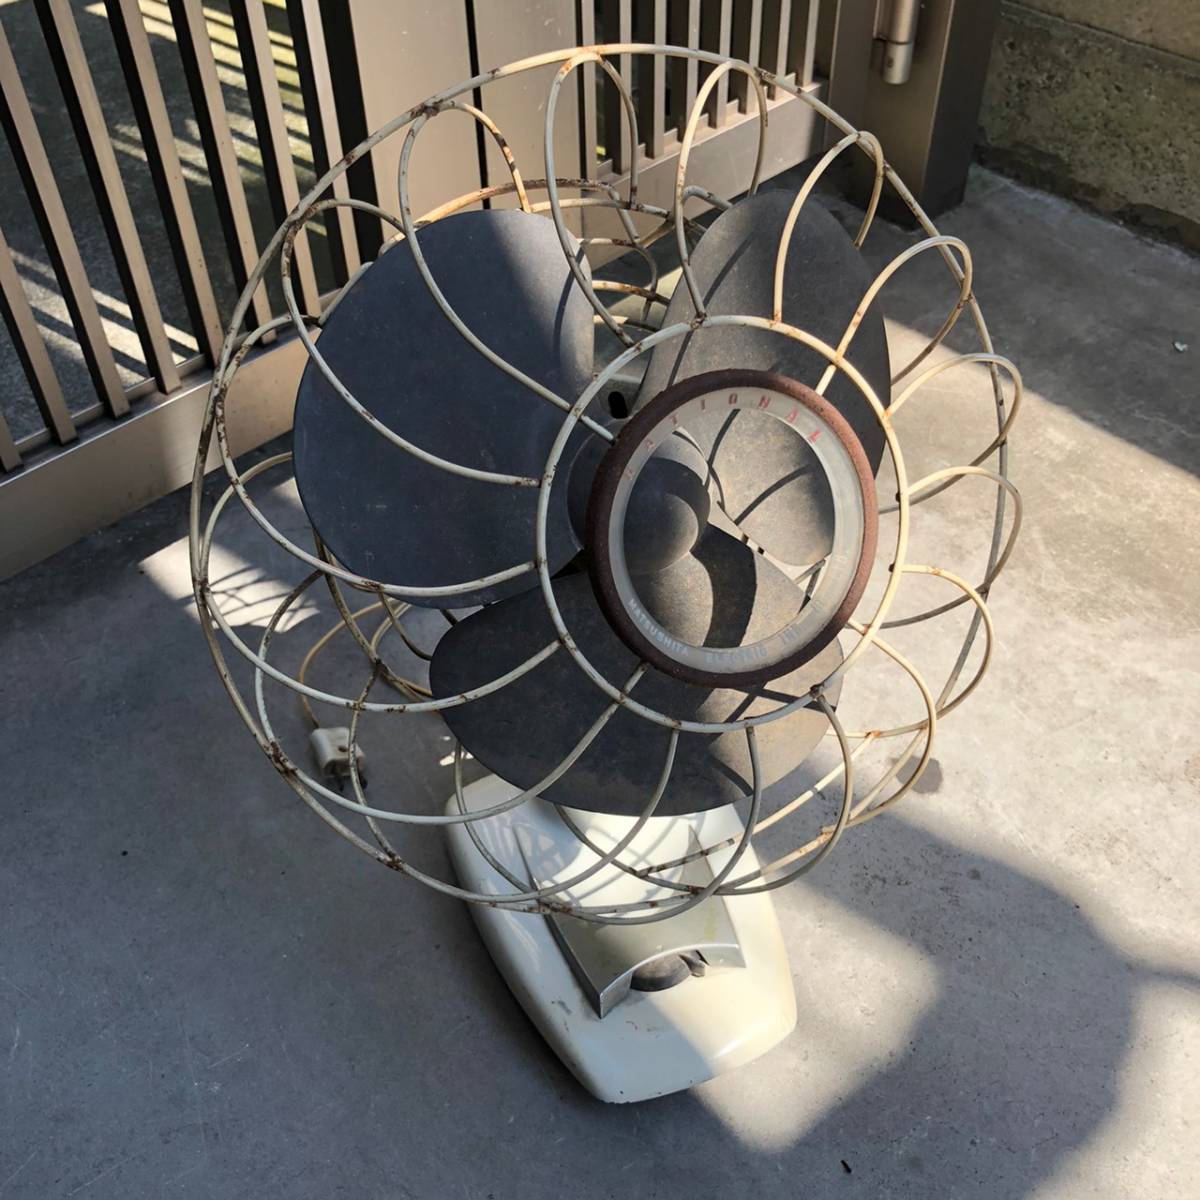 AGK289A National electric fan T-5B National Showa Retro antique that time thing Showa Retro antique that time thing 